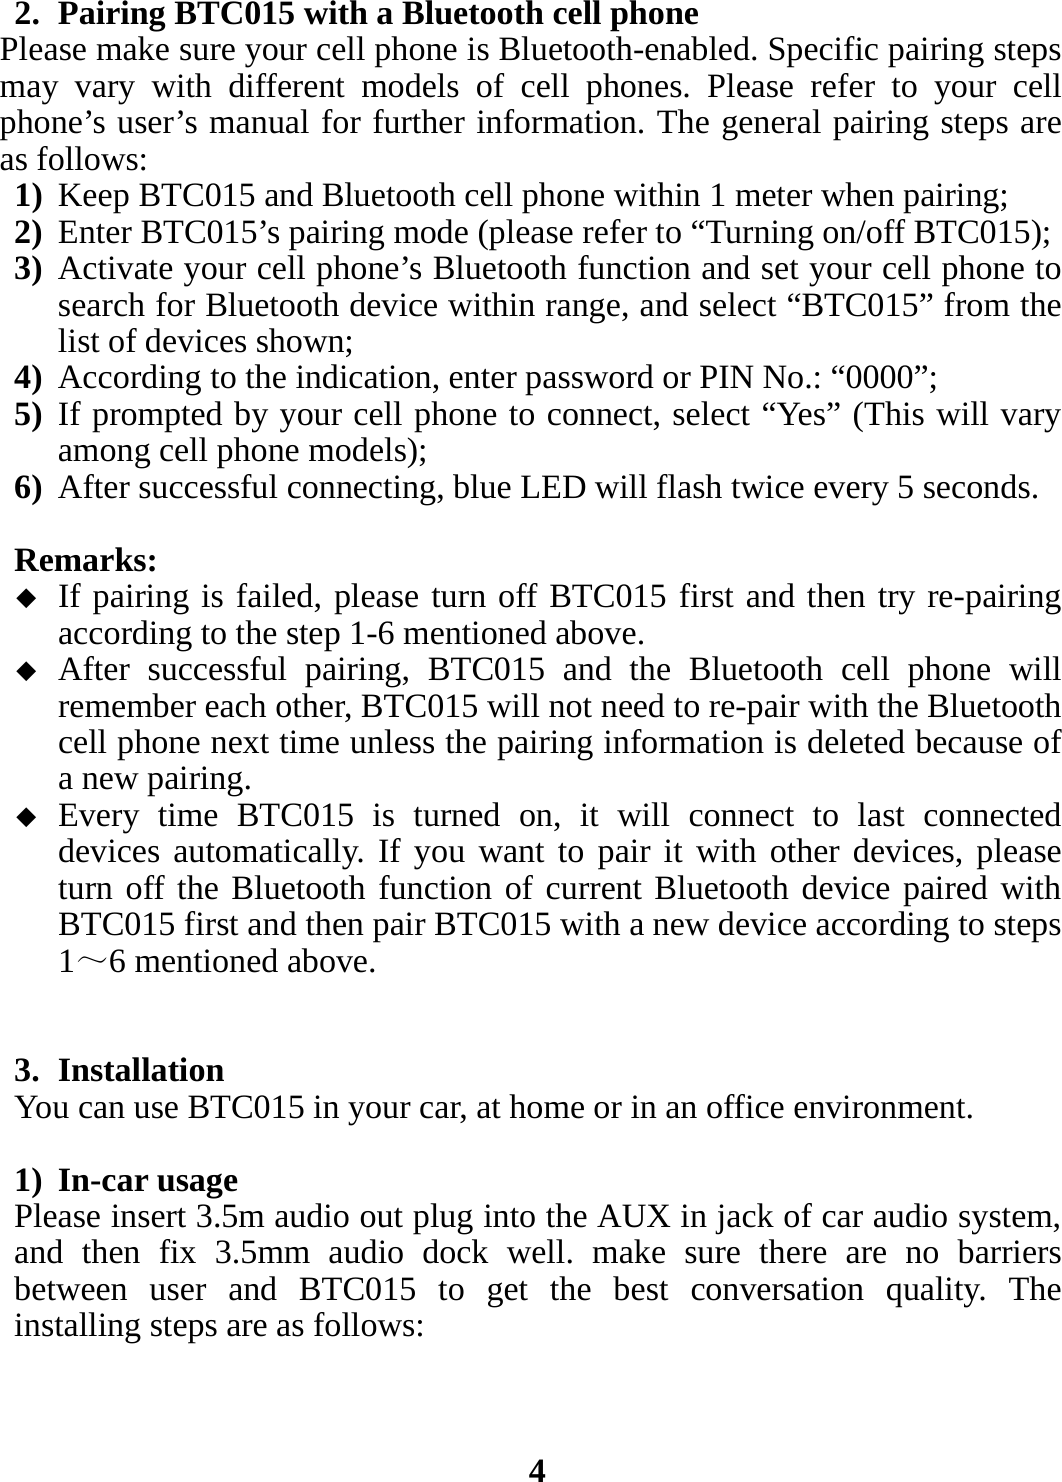 2. Pairing BTC015 with a Bluetooth cell phone Please make sure your cell phone is Bluetooth-enabled. Specific pairing steps may vary with different models of cell phones. Please refer to your cell phone’s user’s manual for further information. The general pairing steps are as follows: 1) Keep BTC015 and Bluetooth cell phone within 1 meter when pairing; 2) Enter BTC015’s pairing mode (please refer to “Turning on/off BTC015); 3) Activate your cell phone’s Bluetooth function and set your cell phone to search for Bluetooth device within range, and select “BTC015” from the list of devices shown; 4) According to the indication, enter password or PIN No.: “0000”; 5) If prompted by your cell phone to connect, select “Yes” (This will vary among cell phone models); 6) After successful connecting, blue LED will flash twice every 5 seconds.  Remarks:   If pairing is failed, please turn off BTC015 first and then try re-pairing according to the step 1-6 mentioned above.  After successful pairing, BTC015 and the Bluetooth cell phone will remember each other, BTC015 will not need to re-pair with the Bluetooth cell phone next time unless the pairing information is deleted because of a new pairing.  Every time BTC015 is turned on, it will connect to last connected devices automatically. If you want to pair it with other devices, please turn off the Bluetooth function of current Bluetooth device paired with BTC015 first and then pair BTC015 with a new device according to steps 1～6 mentioned above.   3. Installation You can use BTC015 in your car, at home or in an office environment.  1) In-car usage Please insert 3.5m audio out plug into the AUX in jack of car audio system, and then fix 3.5mm audio dock well. make sure there are no barriers between user and BTC015 to get the best conversation quality. The installing steps are as follows:    4 